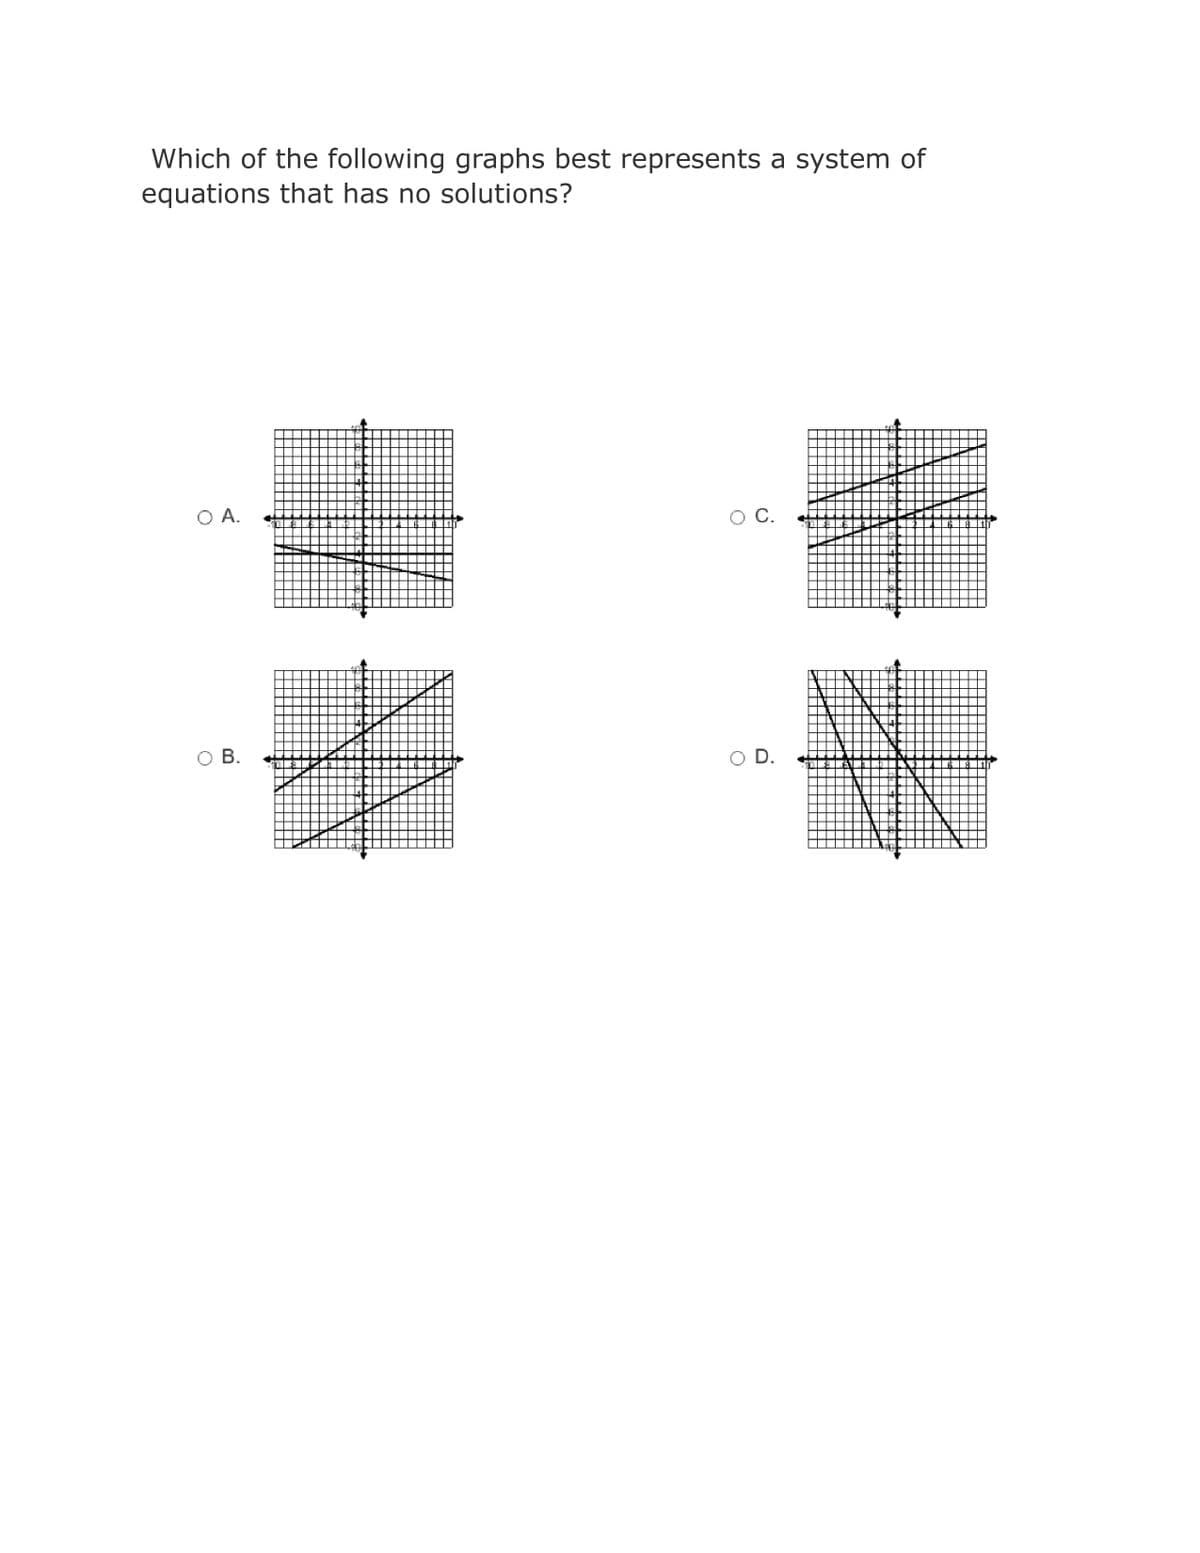 Which of the following graphs best represents a system of
equations that has no solutions?
O A.
O B.
O C.
O D.
751